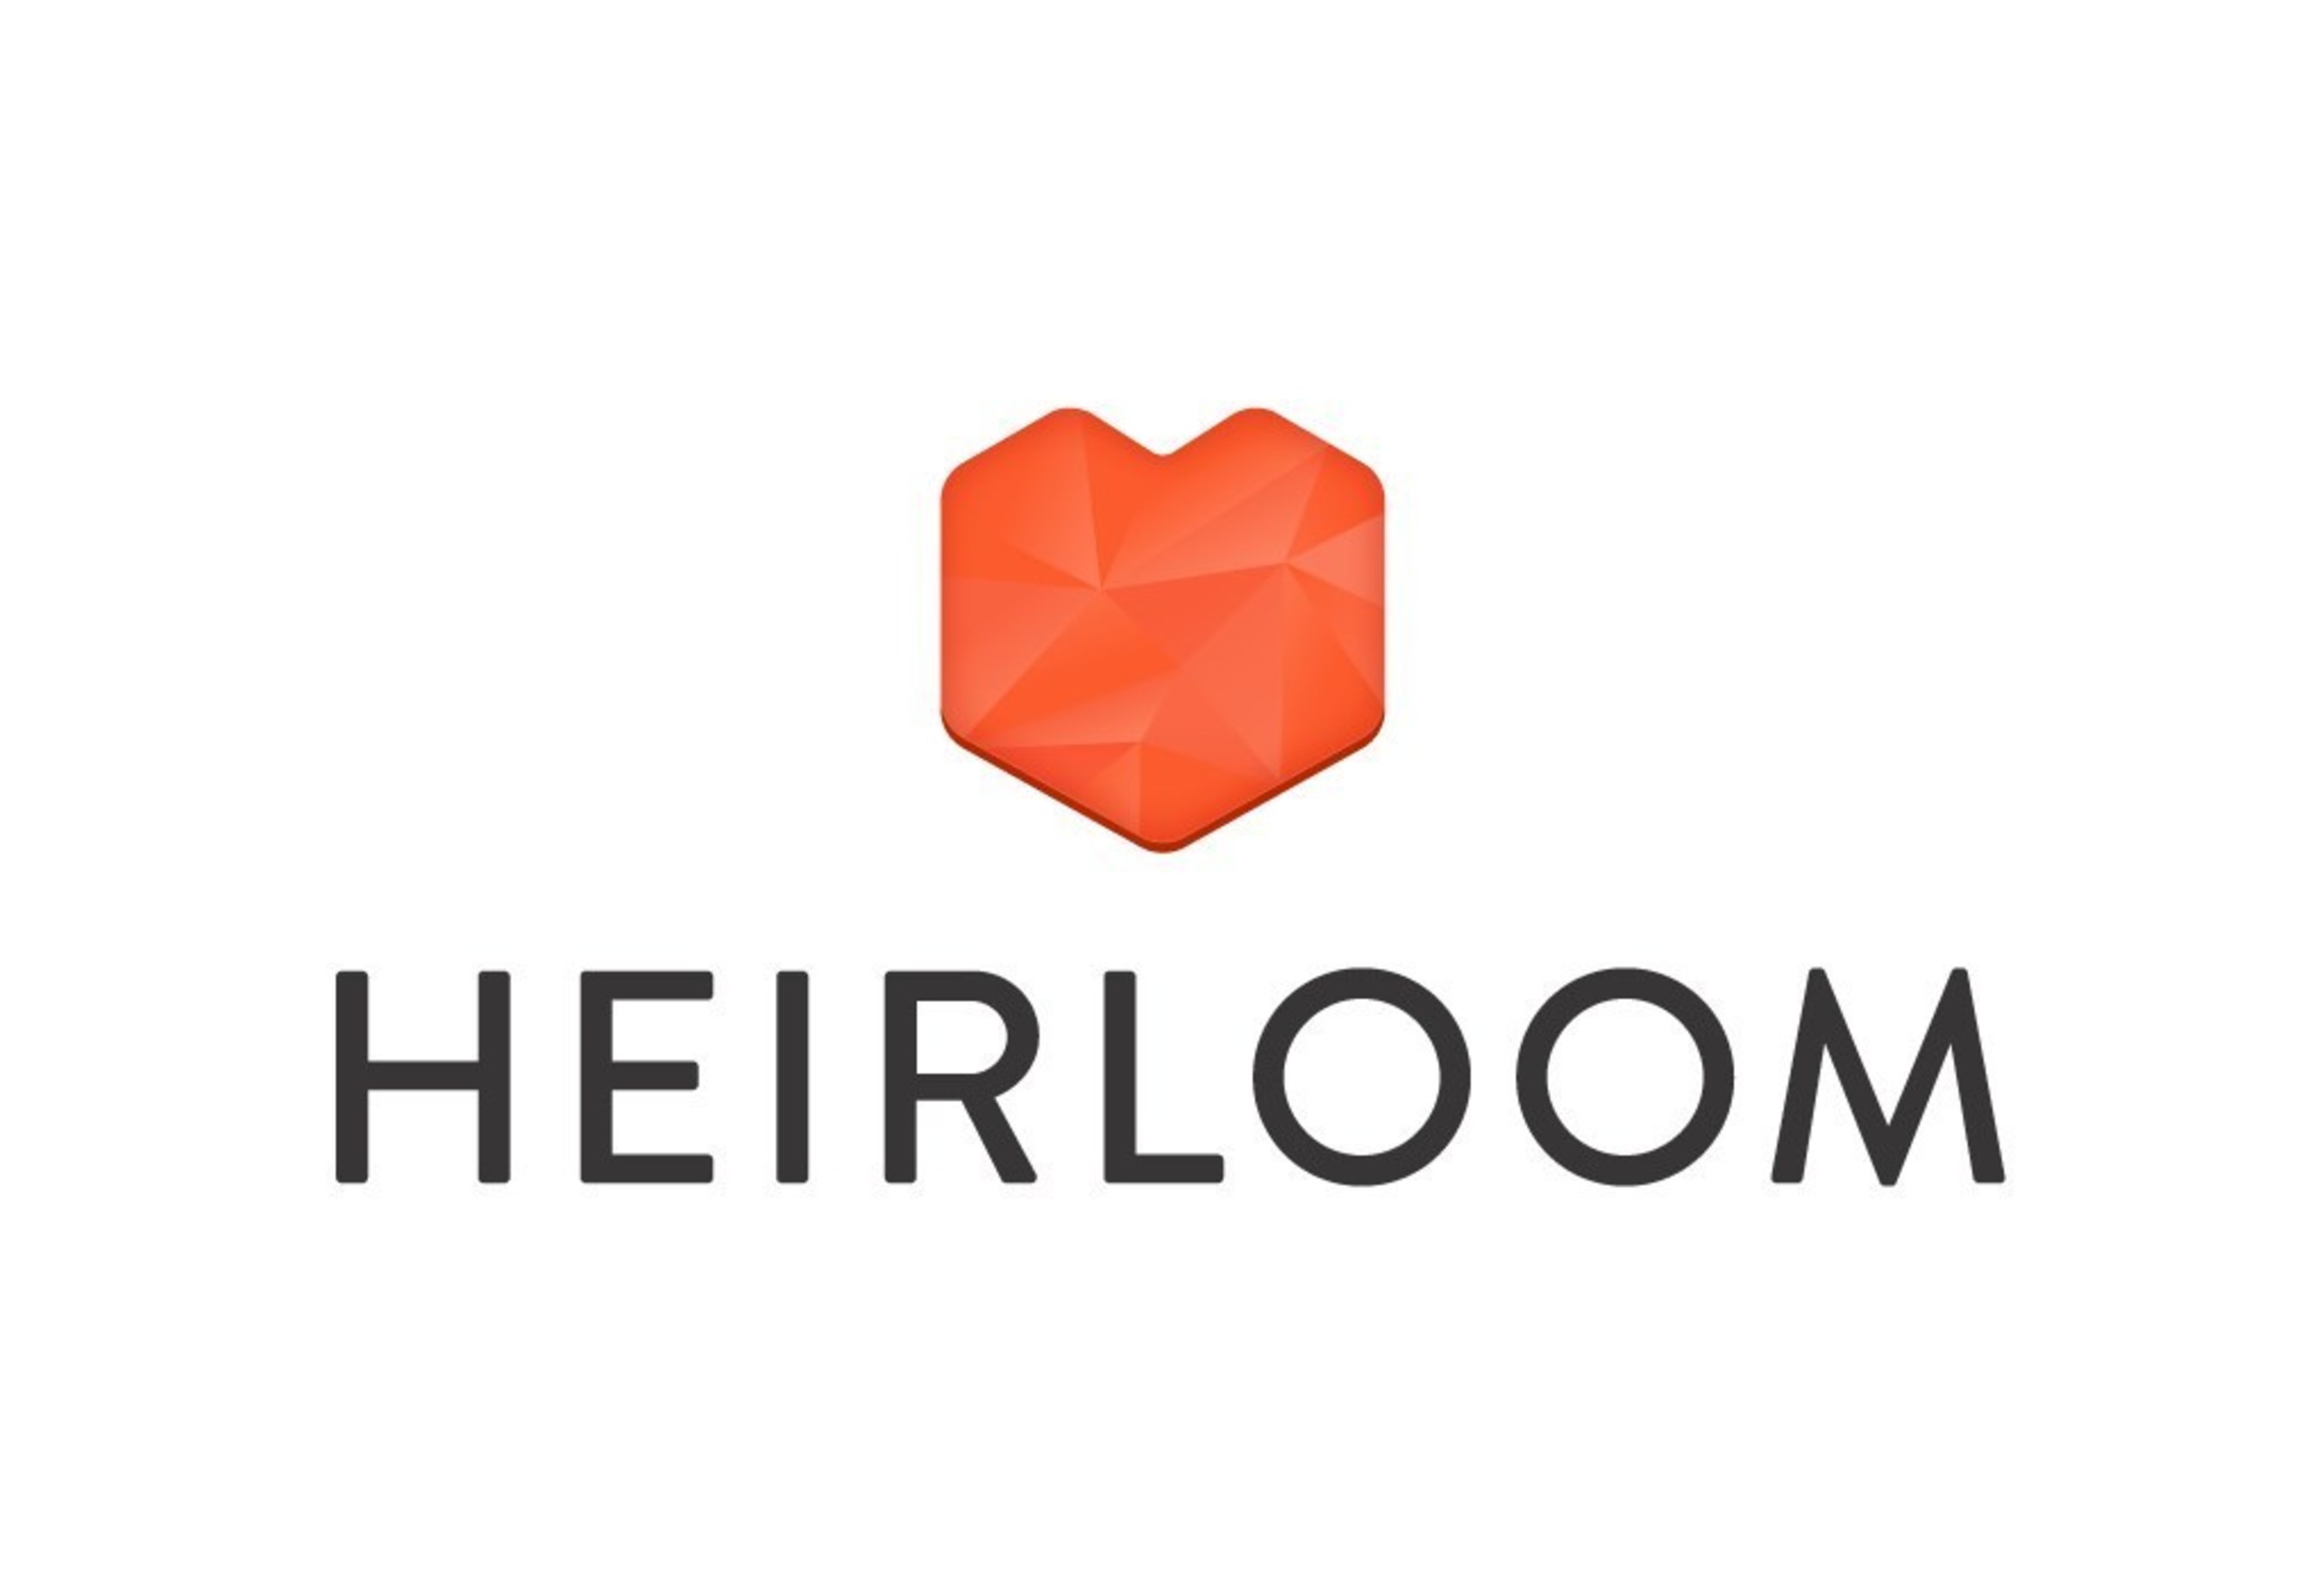 Heirloom, the creators of a new platform that transforms photographic prints into beautiful digital images and allows people to connect privately over shared memories, today released the Heirloom app and announced it has raised $1 million in seed funding. Investors include Tencent and a group of angel investors led by Eduardo Vivas. Heirloom's app is available to download for free on iOS (Apple App Store) and Android (Google Play).